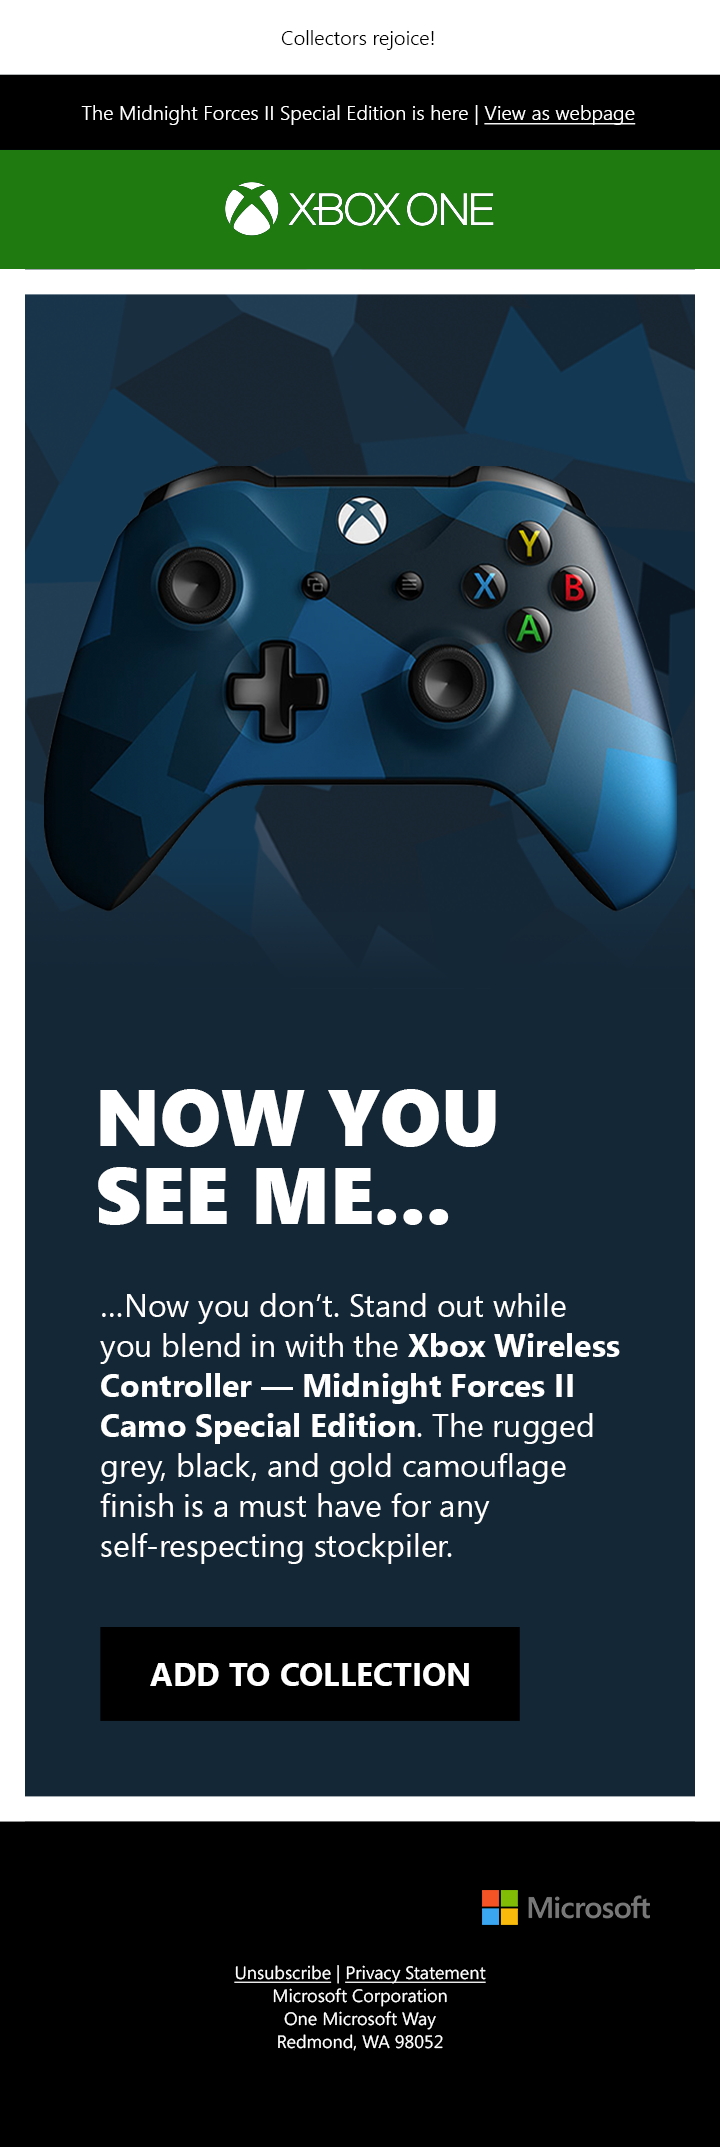 XBOX_MidnightForces_Collector.png